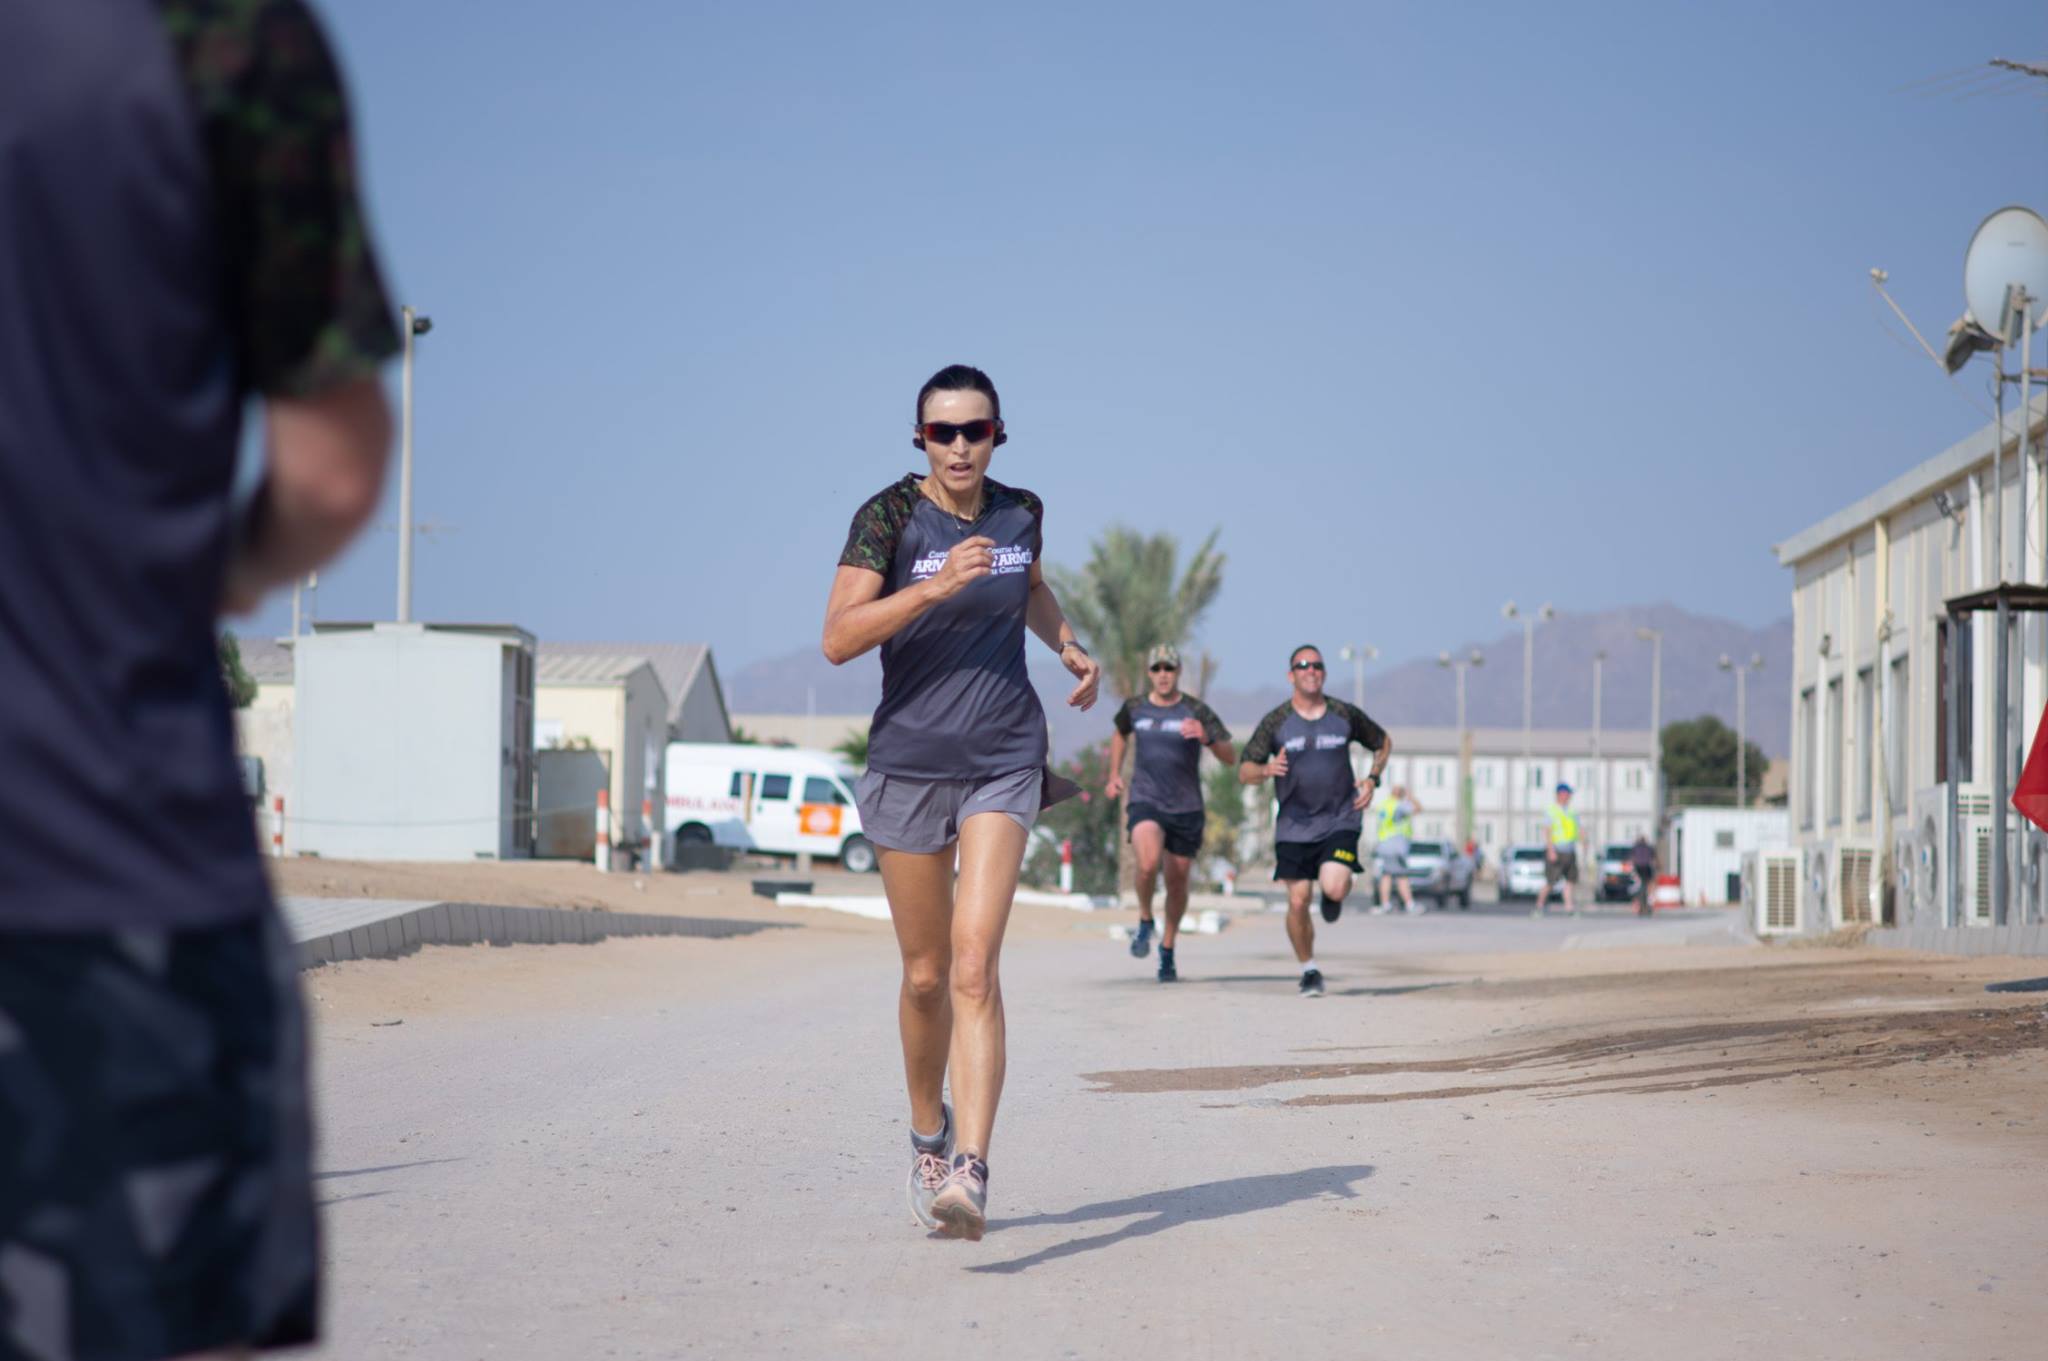 Sinai, Egypt. 28 September 2018 - Canadian Armed Forces members deployed on Operation CALUMET, along with troops and civilians from Australia, Czech Republic, Italy, New Zealand, Norway, Uruguay and the United States participate in a Shadow Canada Army Run in Sinai, Egypt. (Photo Credit : Multinational Force and Observers Press and Visits Office.)